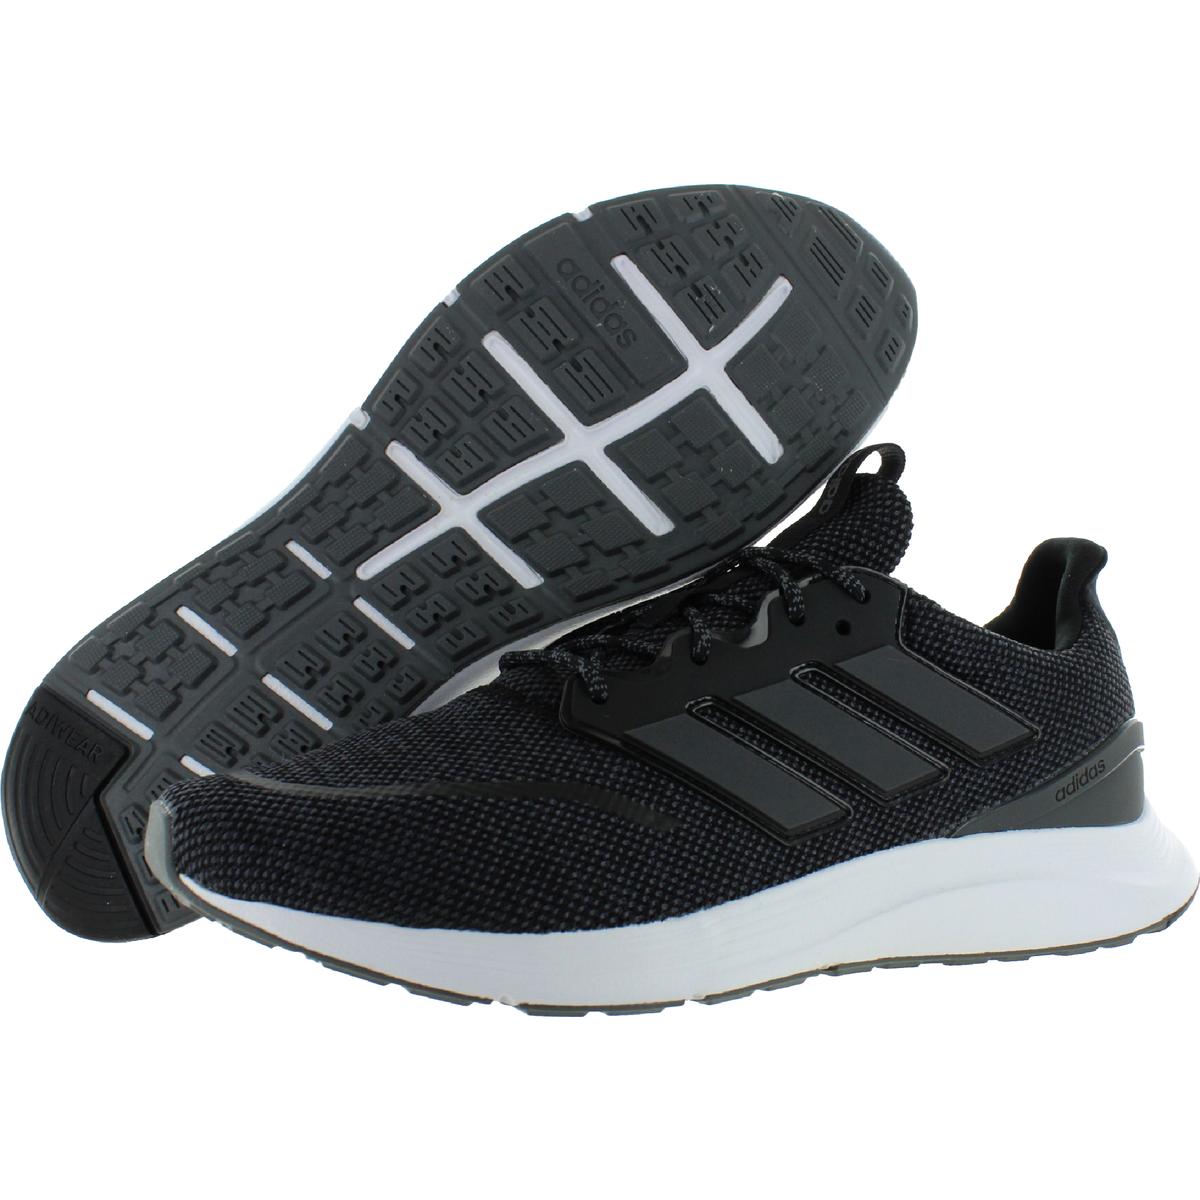 Adidas Mens Energy Falcon Black Running Shoes Sneakers 10 Wide (E) BHFO ...